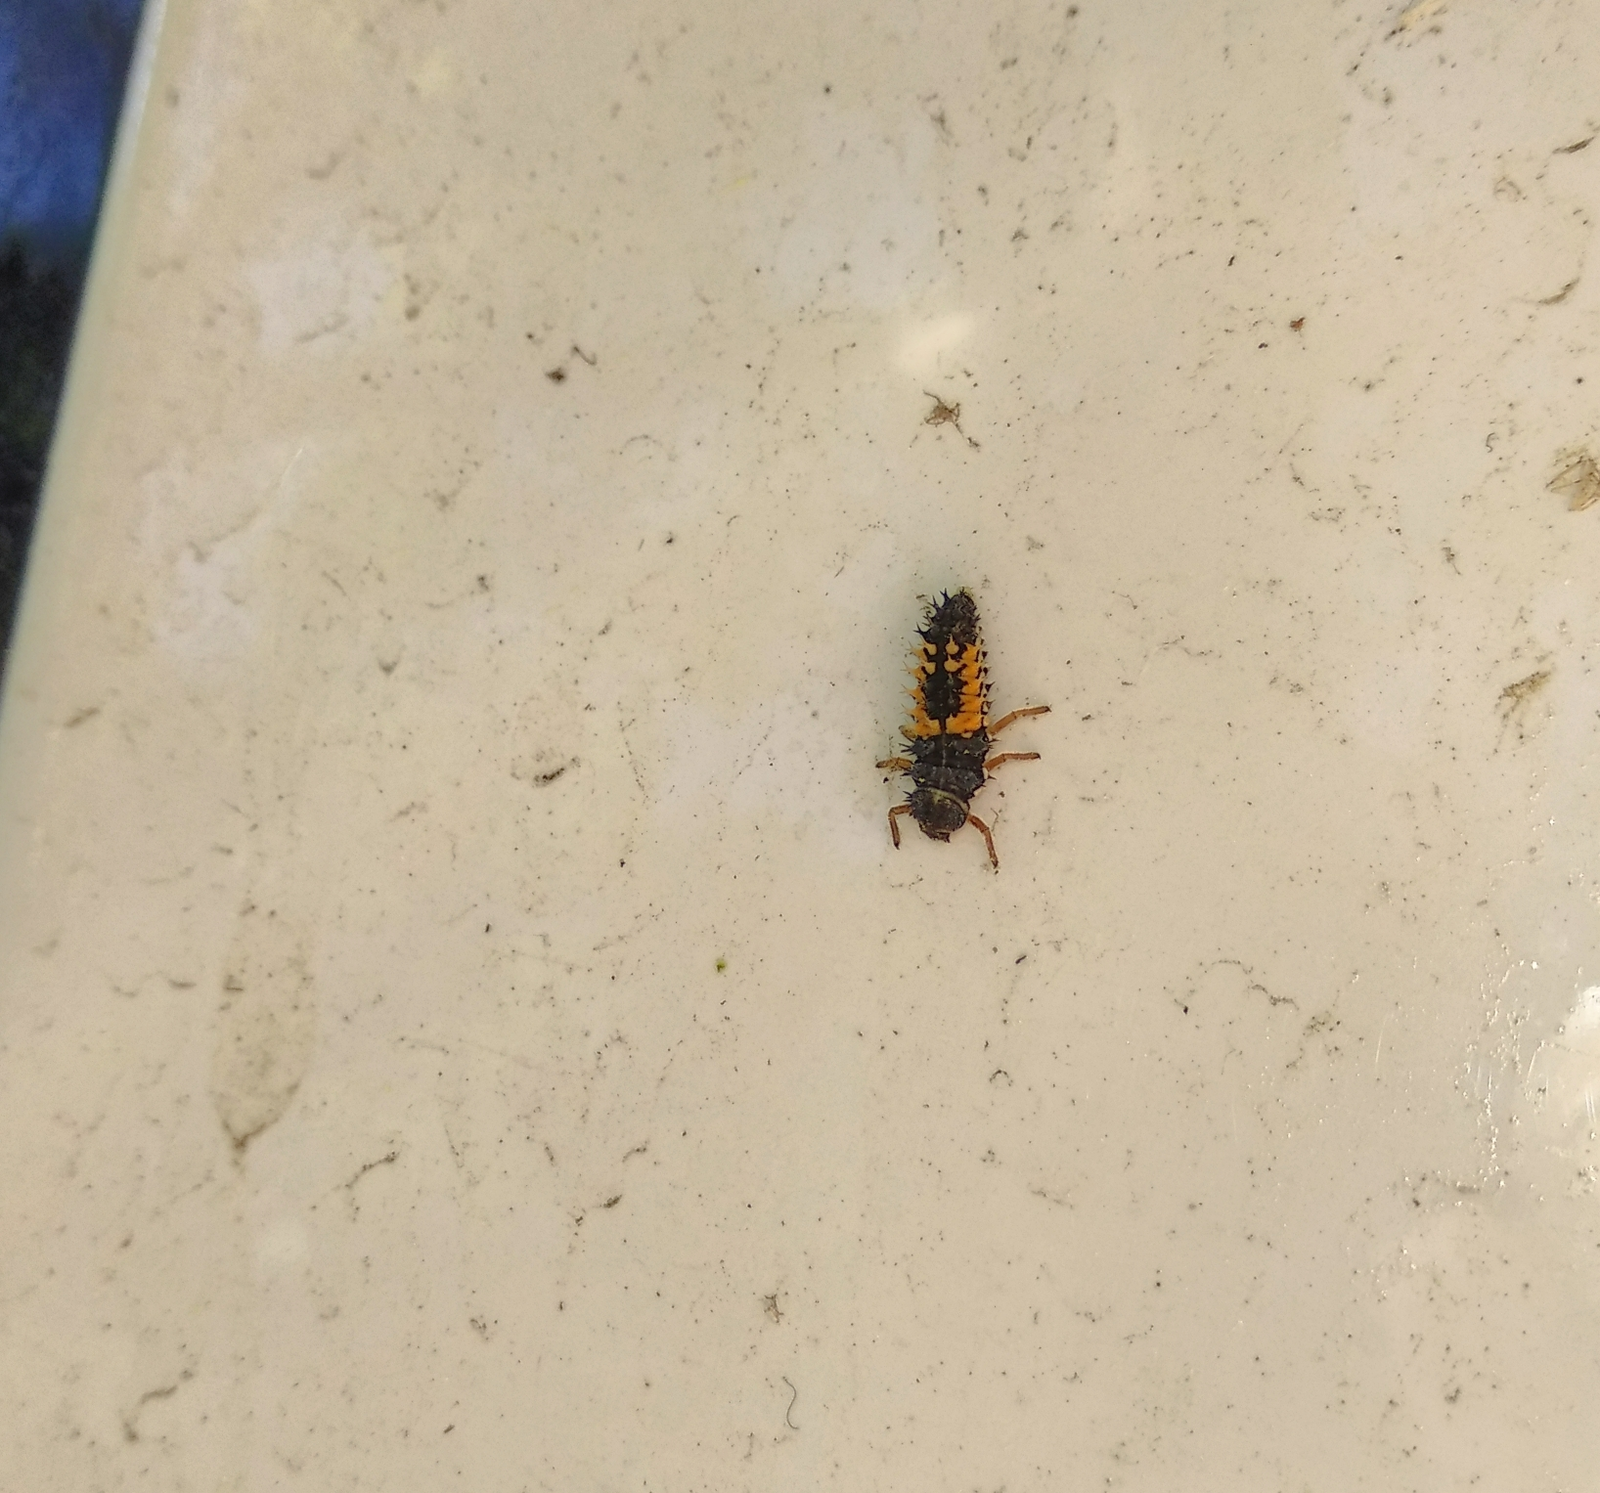 What is this insect? - My, Entomology, Insects, Who is this?, The photo